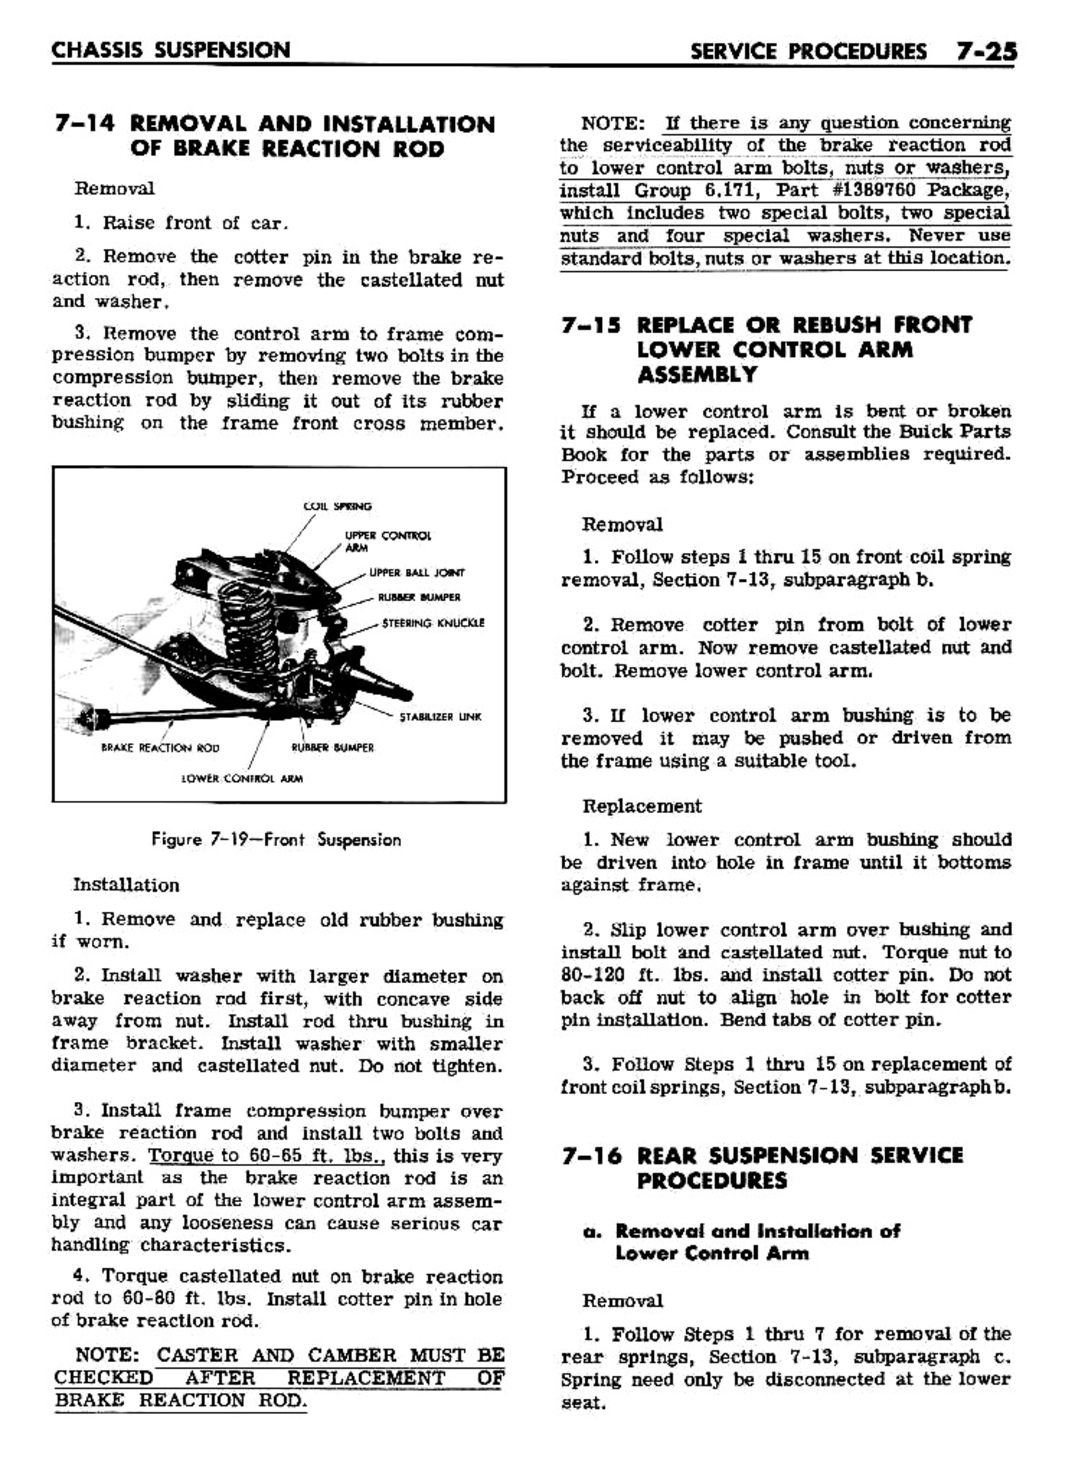 n_07 1961 Buick Shop Manual - Chassis Suspension-025-025.jpg